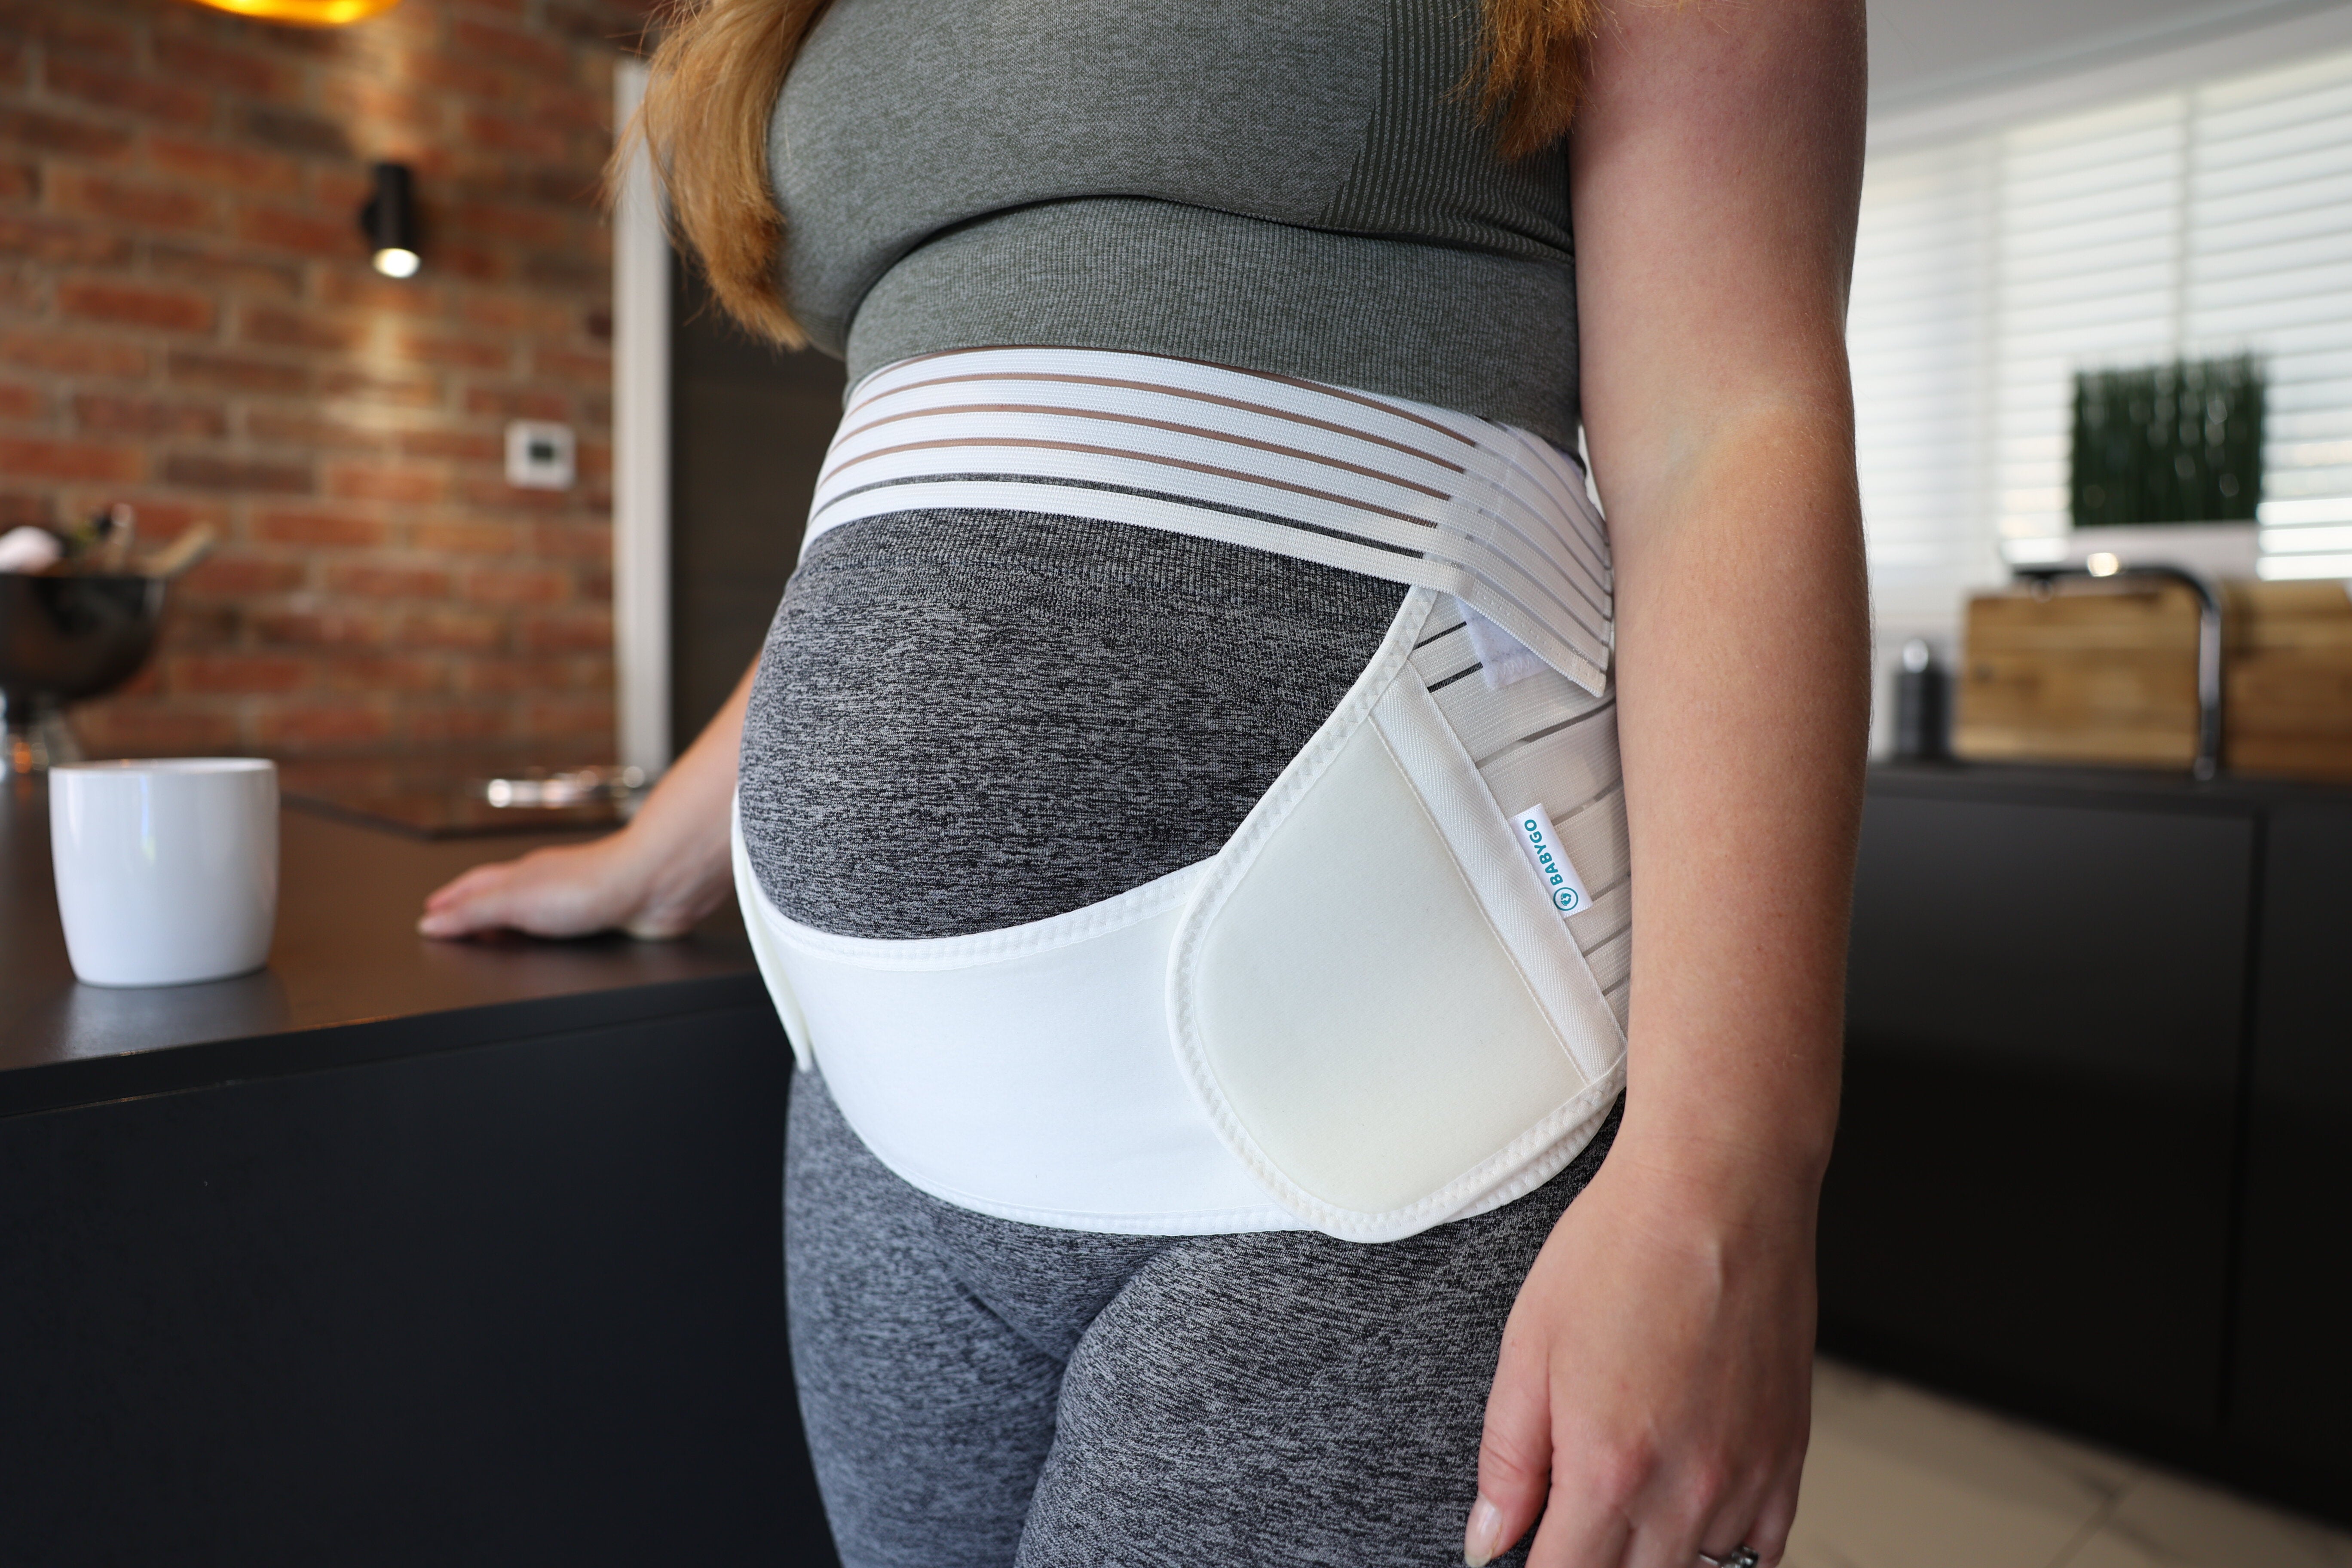 Belly Bands For Pregnant Women, Pregnancy Belly Support Band, Belly Band  For Back Support. Pregnancy Must Haves, Belly Support For Pregnancy. Baby